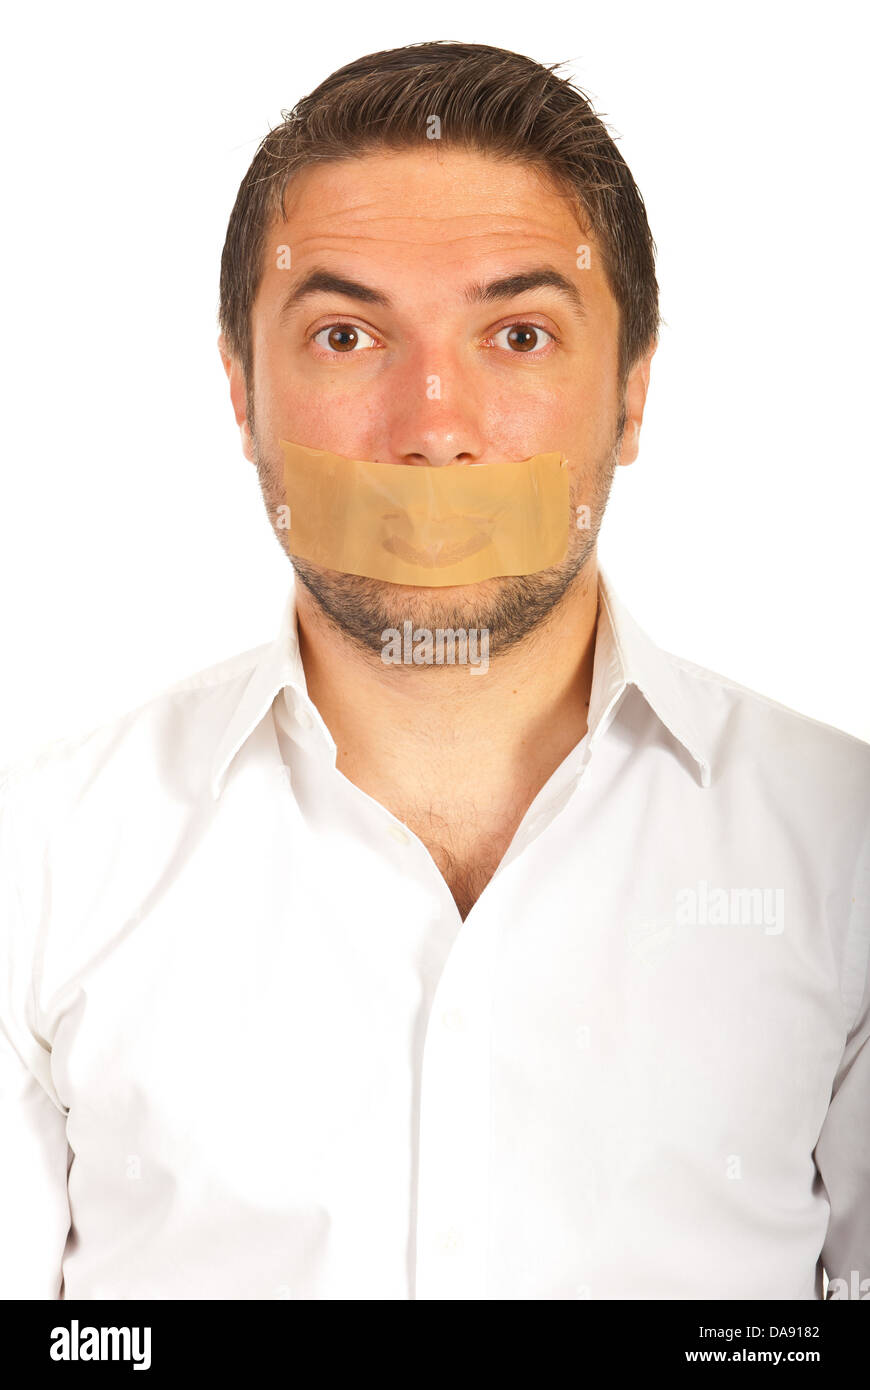 Portrait of man with duct tape over mouth isolated on white background Stock Photo